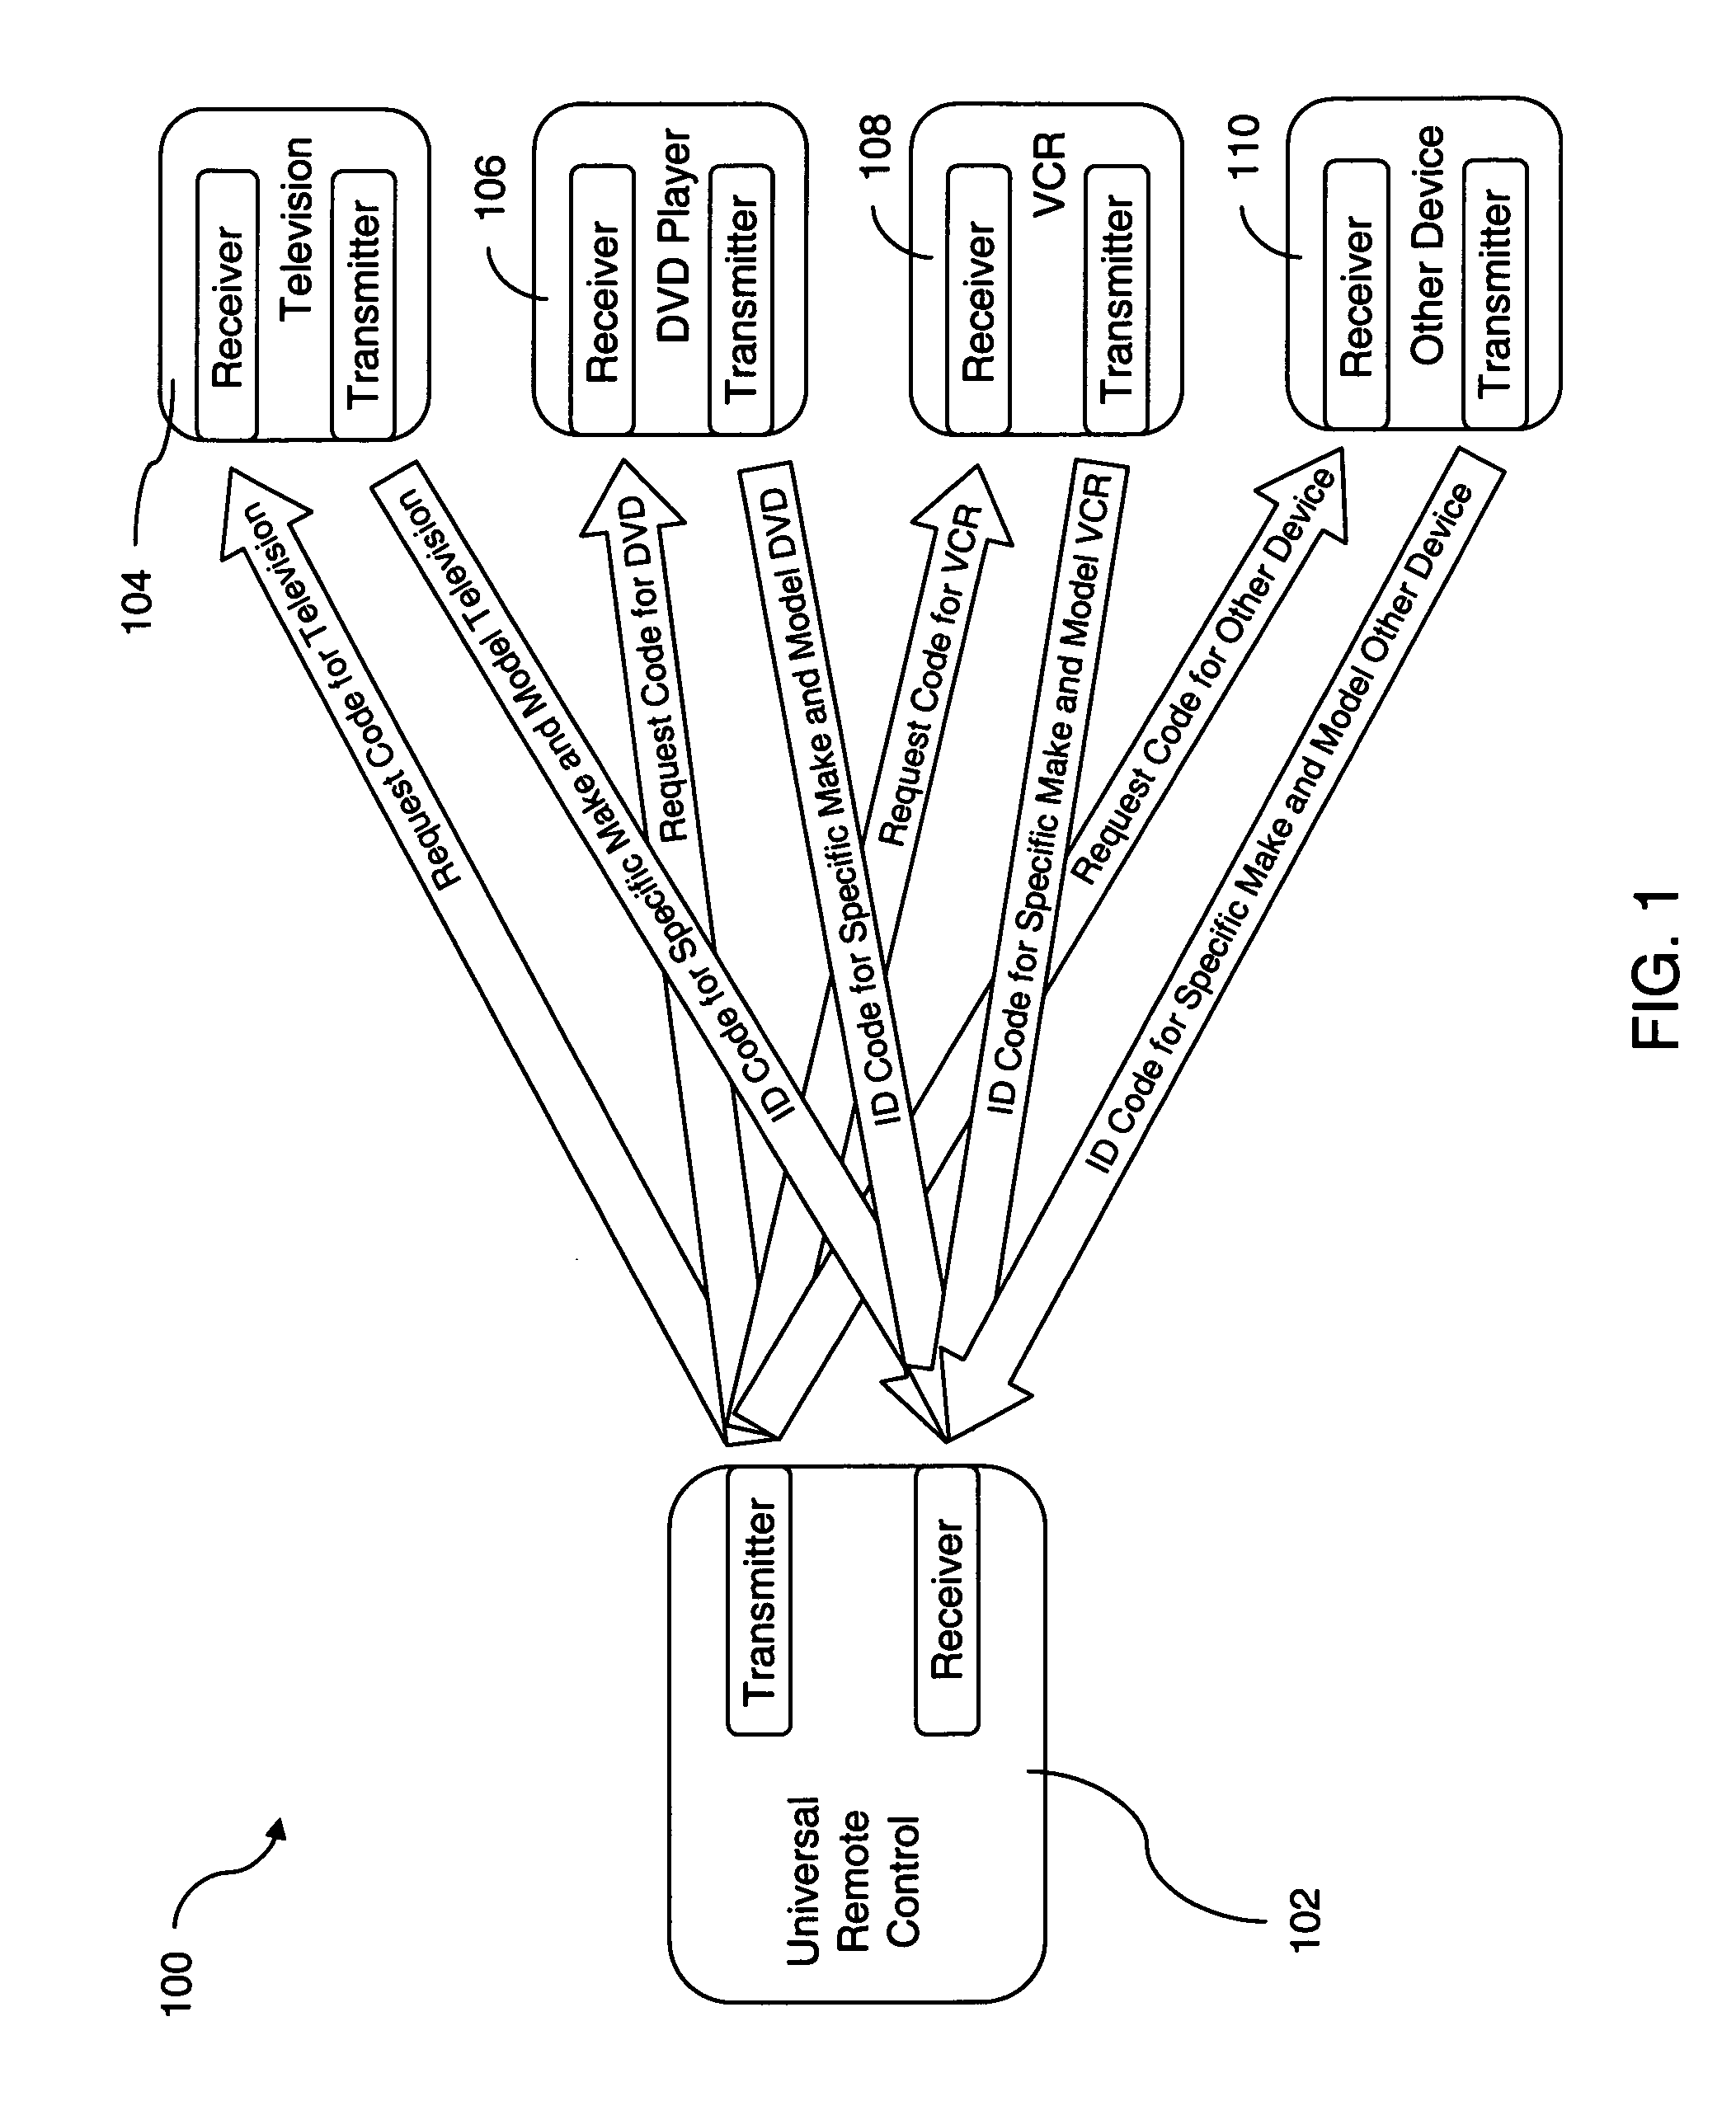 System and method for automated identification of end user devices by a universal remote control device